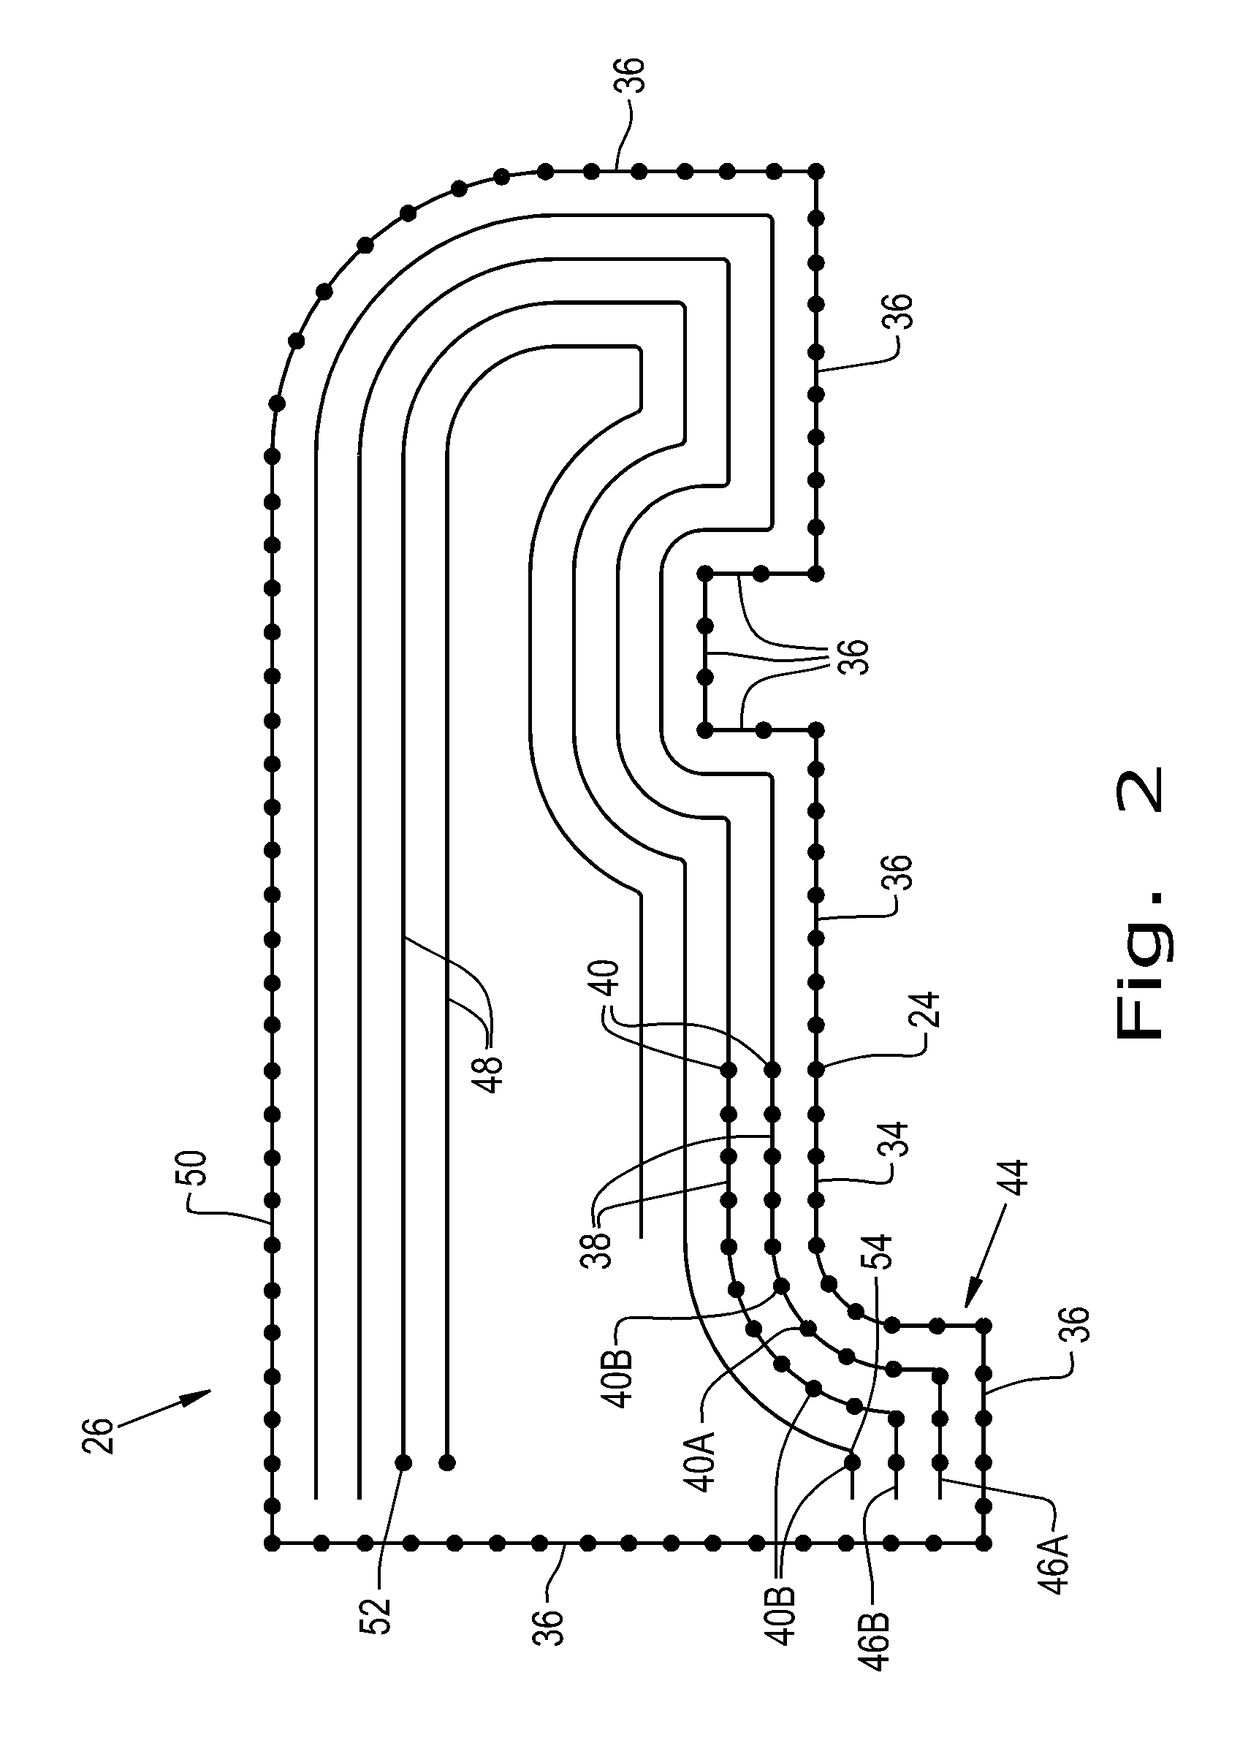 Automatic swath generation device and methods